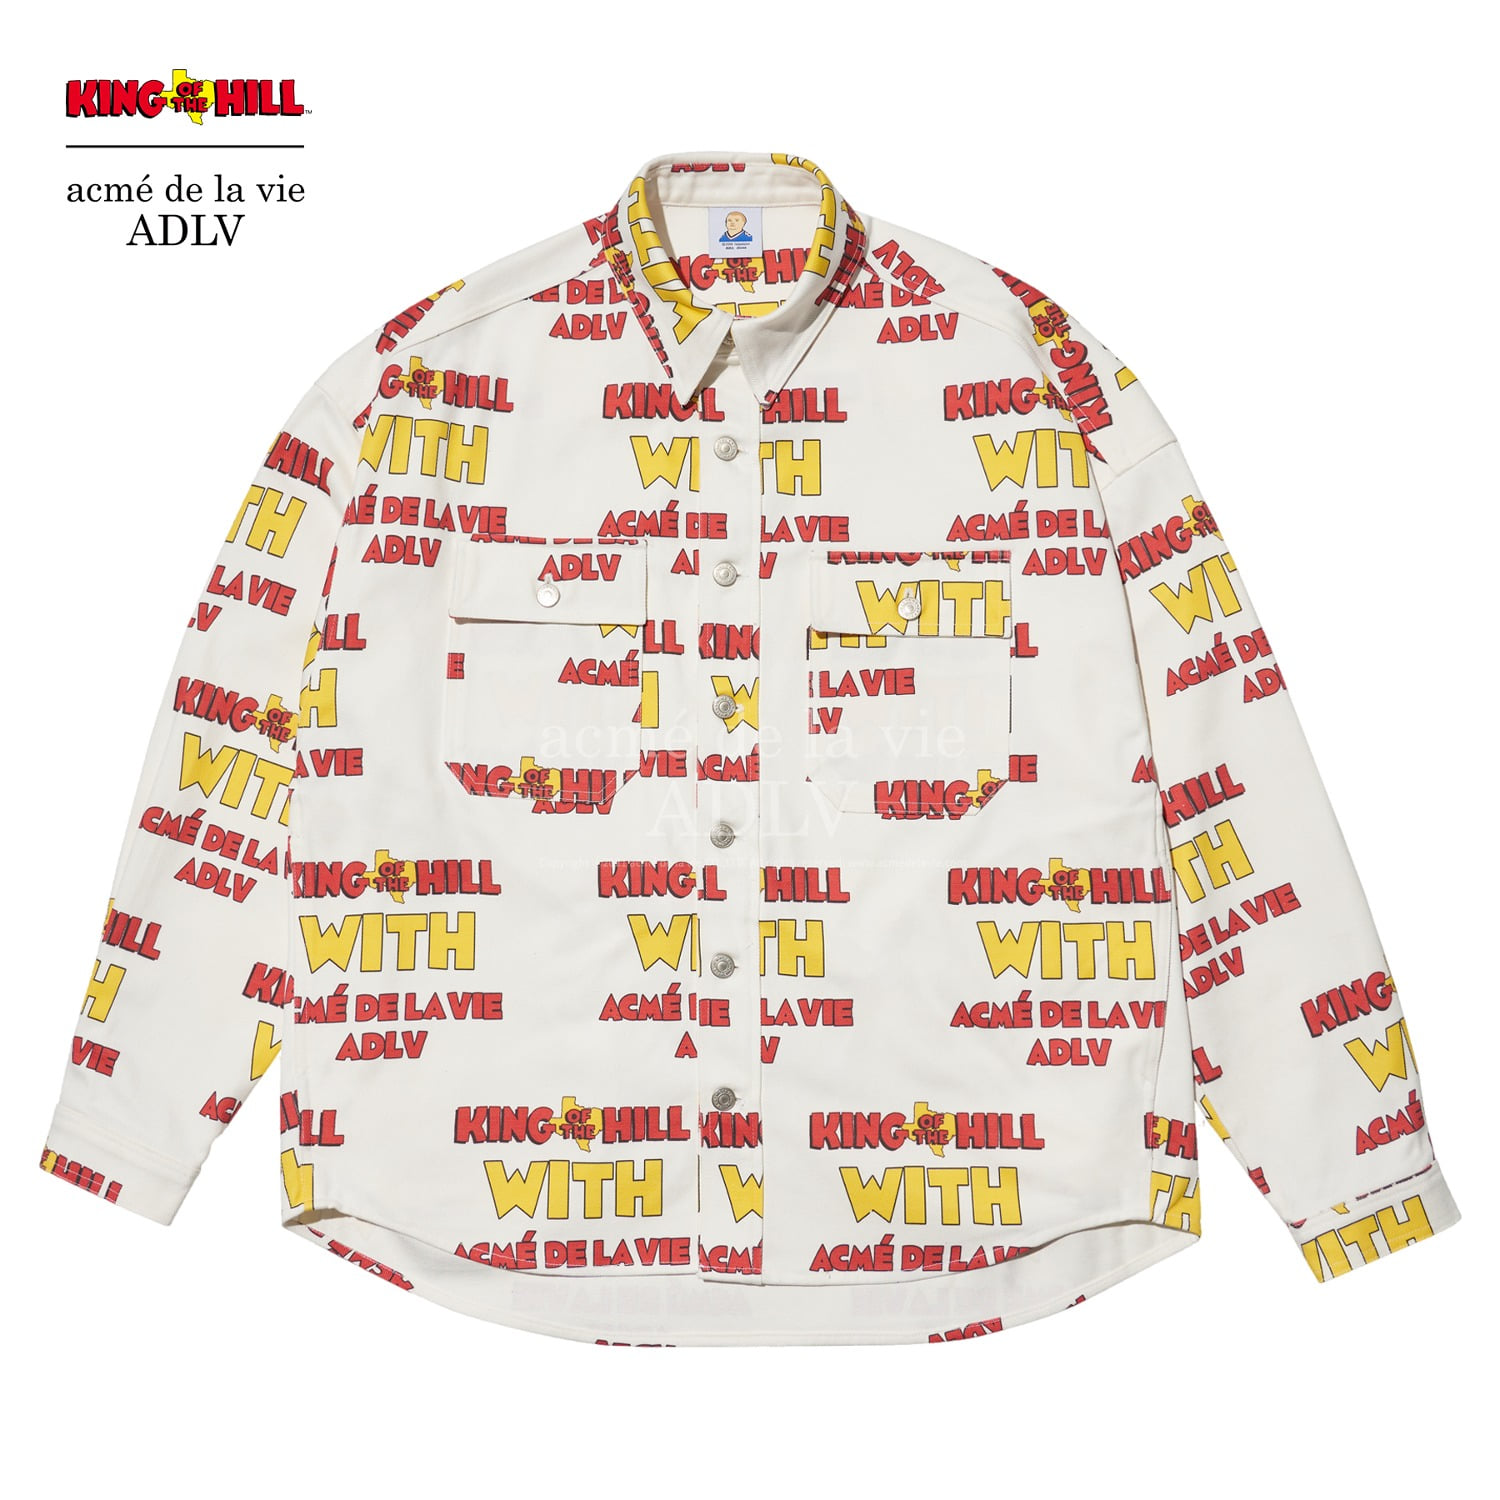 [ADLV X KING OF THE HILL] KING OF THE HILL - WHITE JACKET,아크메드라비 acmedelavie,아크메드라비